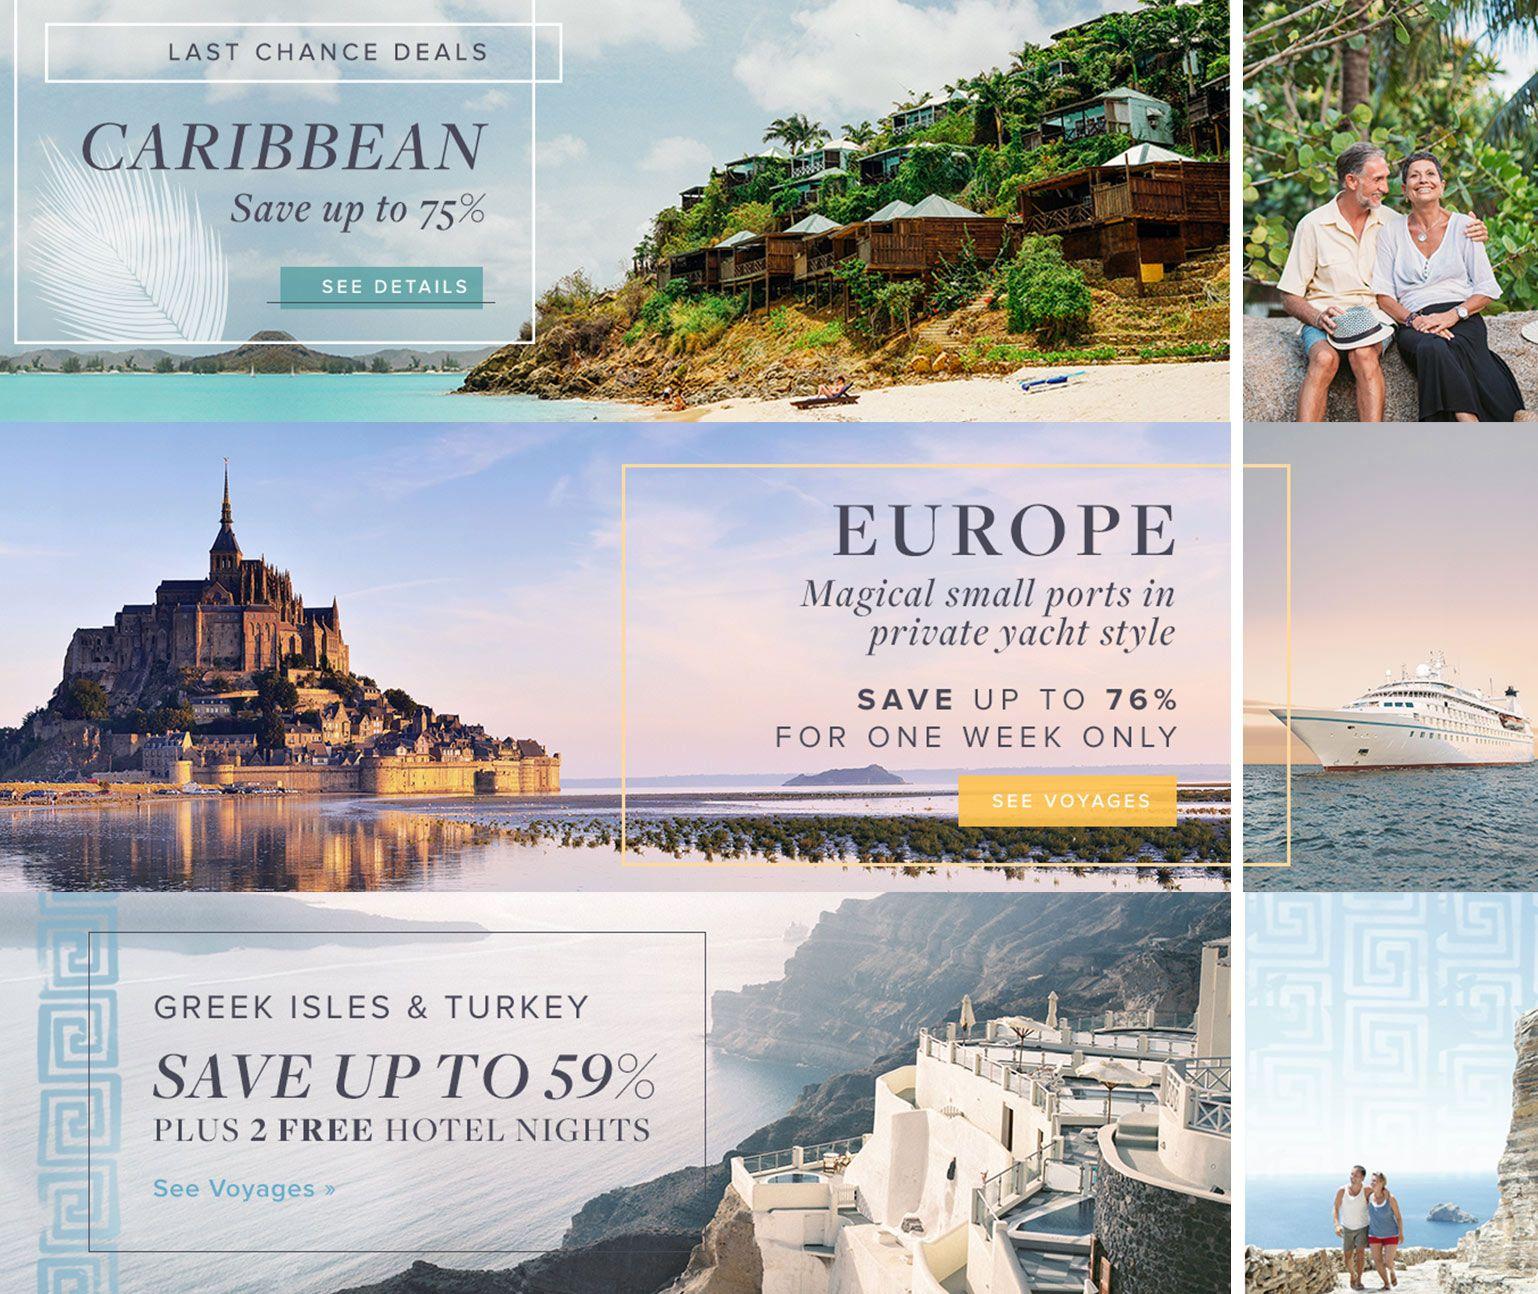 International travel photography as banner ads for Windstar Cruises